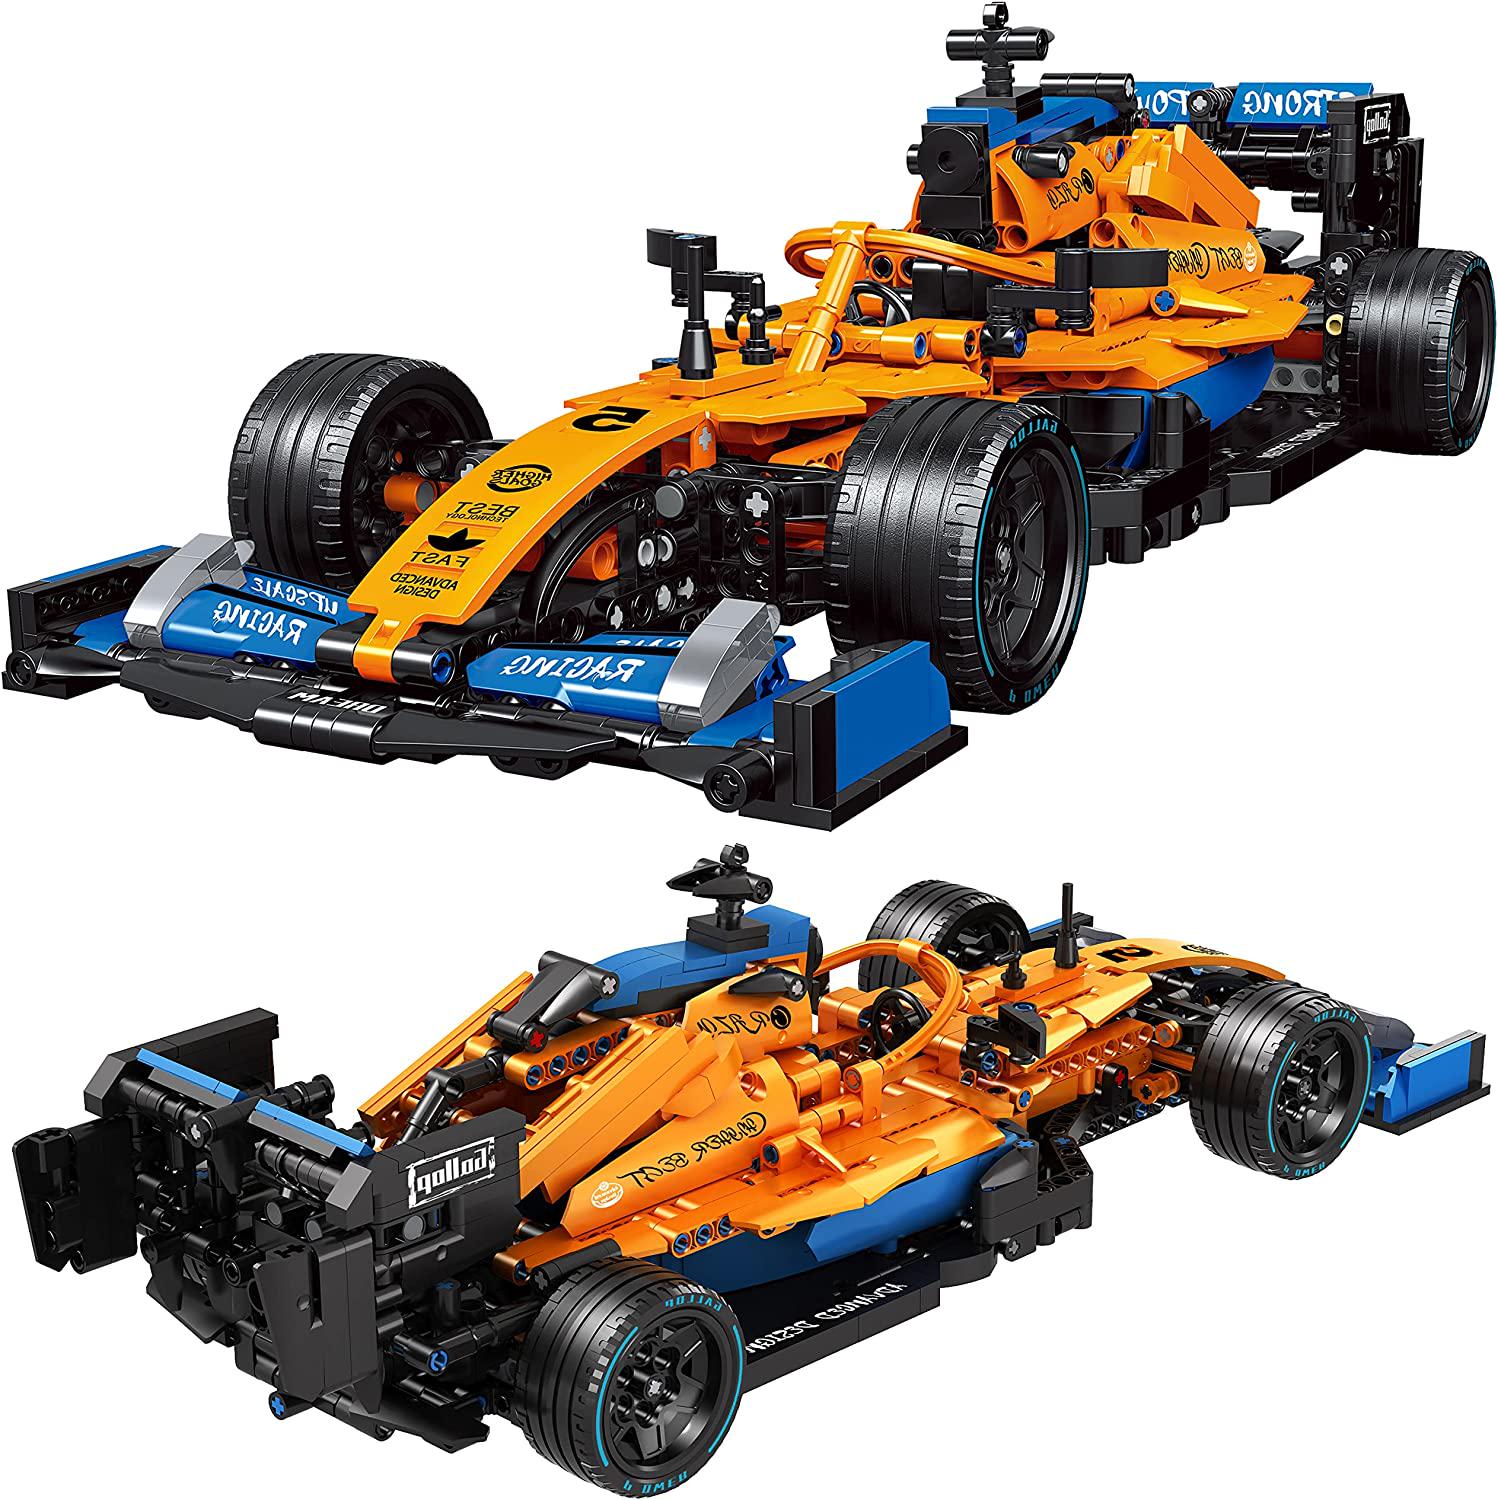 Mesiondy, LEGPS YYDS Racing Car MOC Building Blocks and Construction Toy, Adult Collectible Model Cars Set to Build, 1:14 Scale Car Building Kits Model (1248 Pieces)